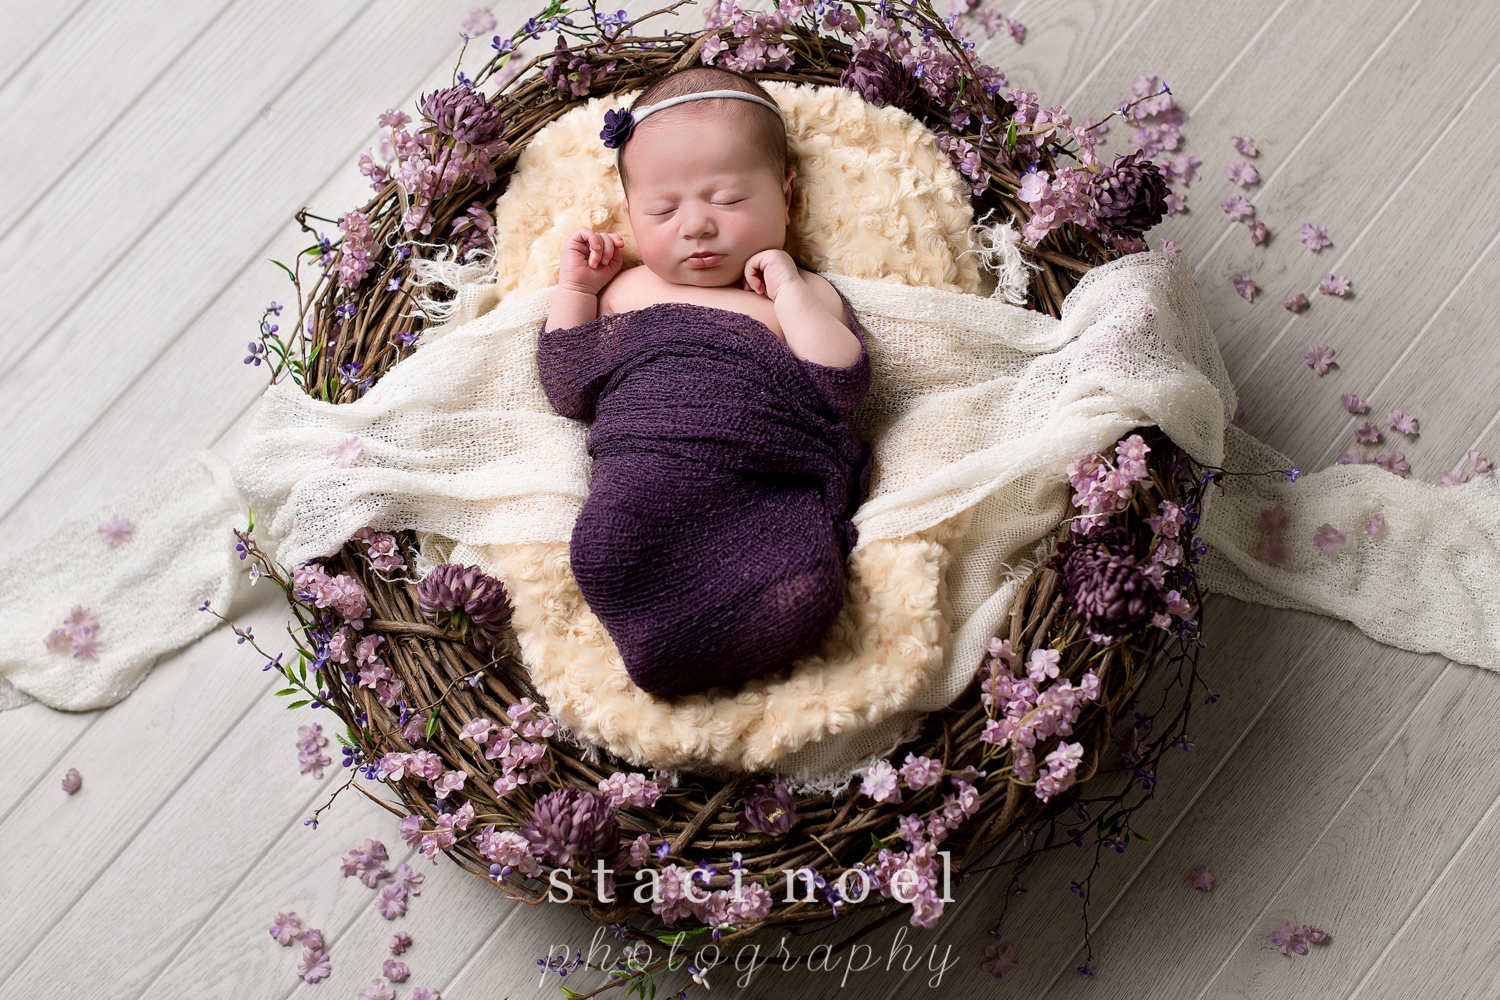 Charlotte NC newborn baby girl photographed by Staci Noel photography with purple wrap in nest with purple flowers